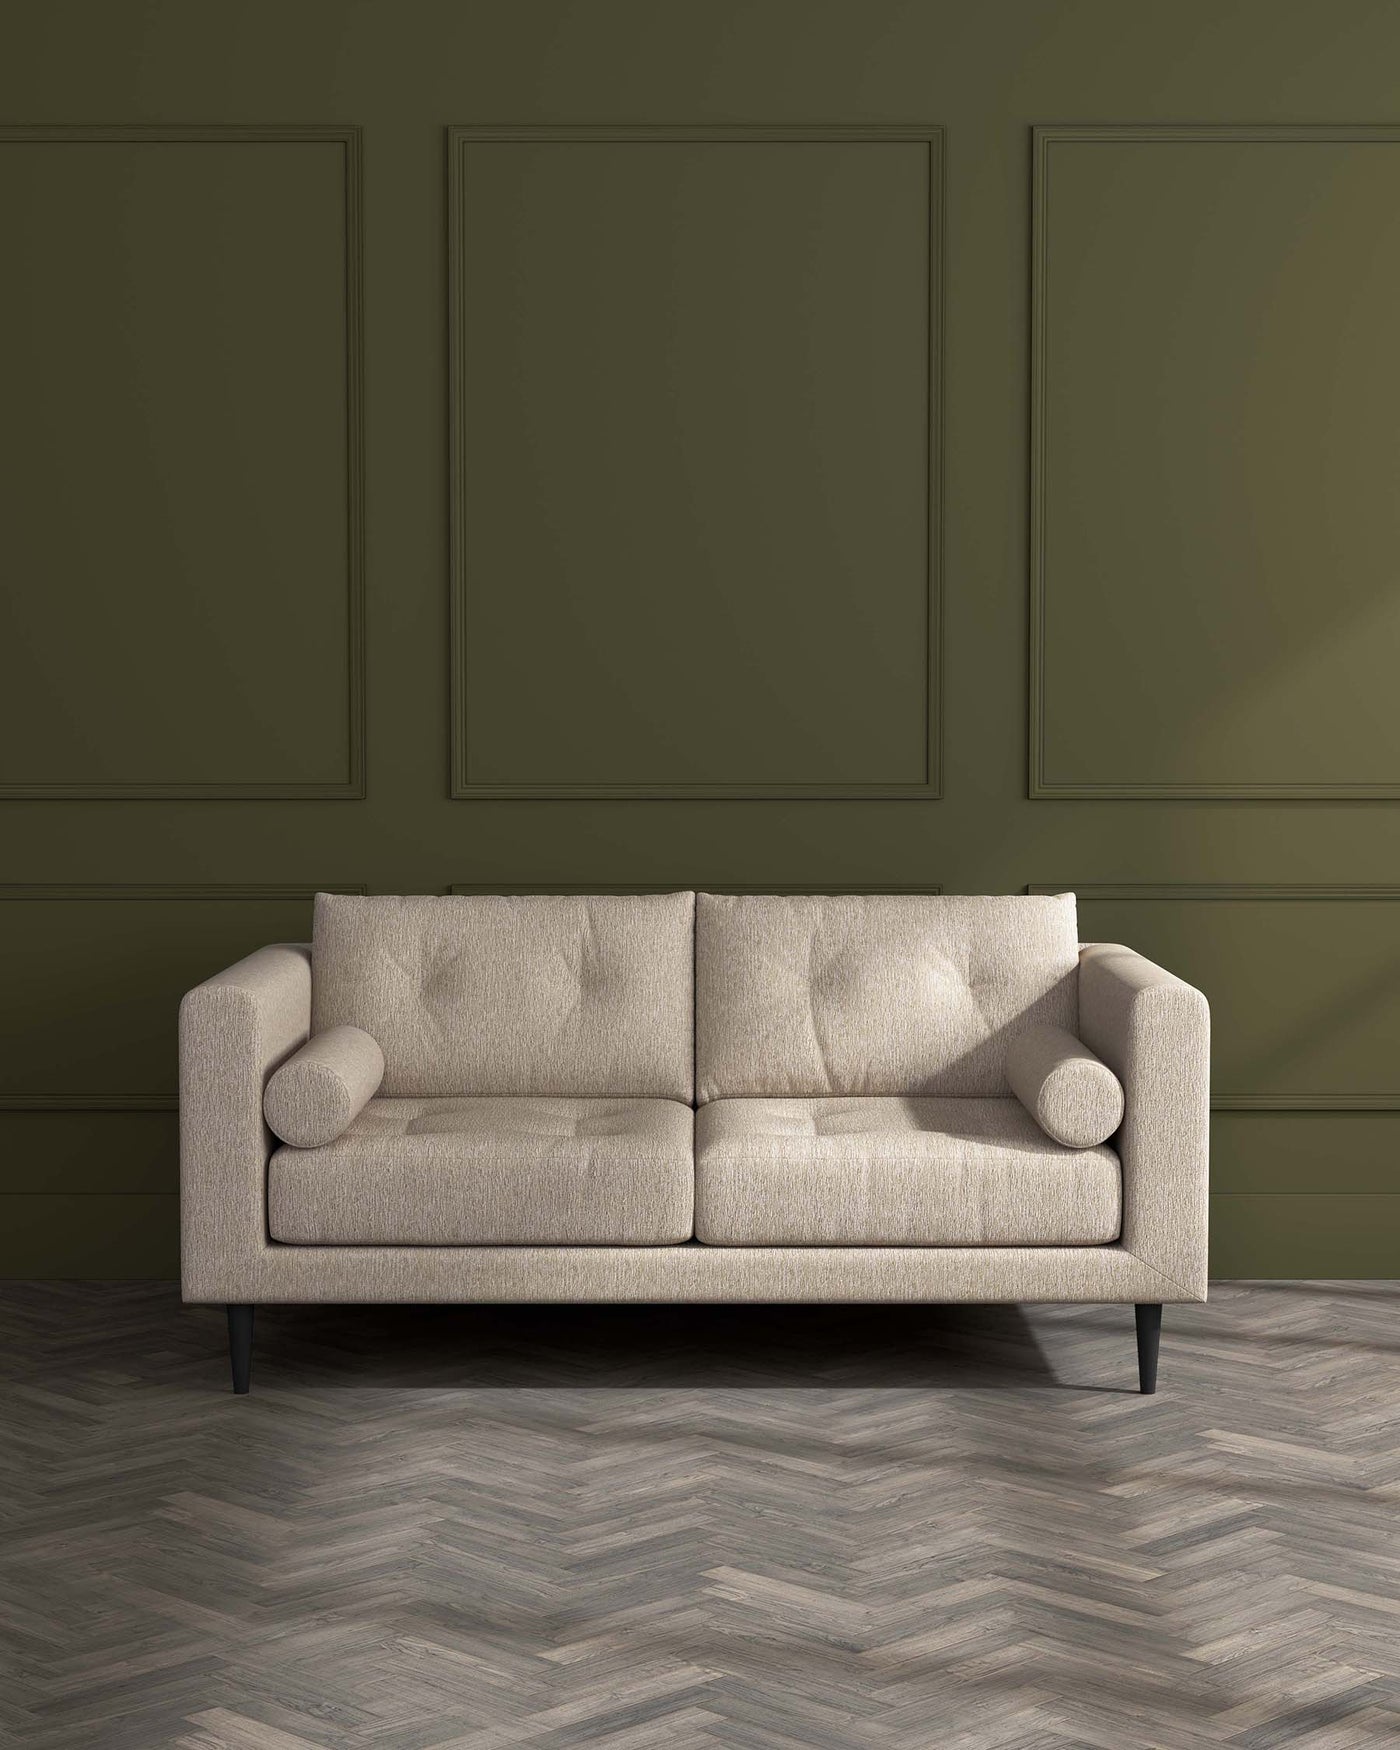 Modern three-seater sofa with textured beige upholstery and cylindrical side pillows, featuring a minimalist design with straight lines and dark, tapered wooden legs, against a green panelled wall.